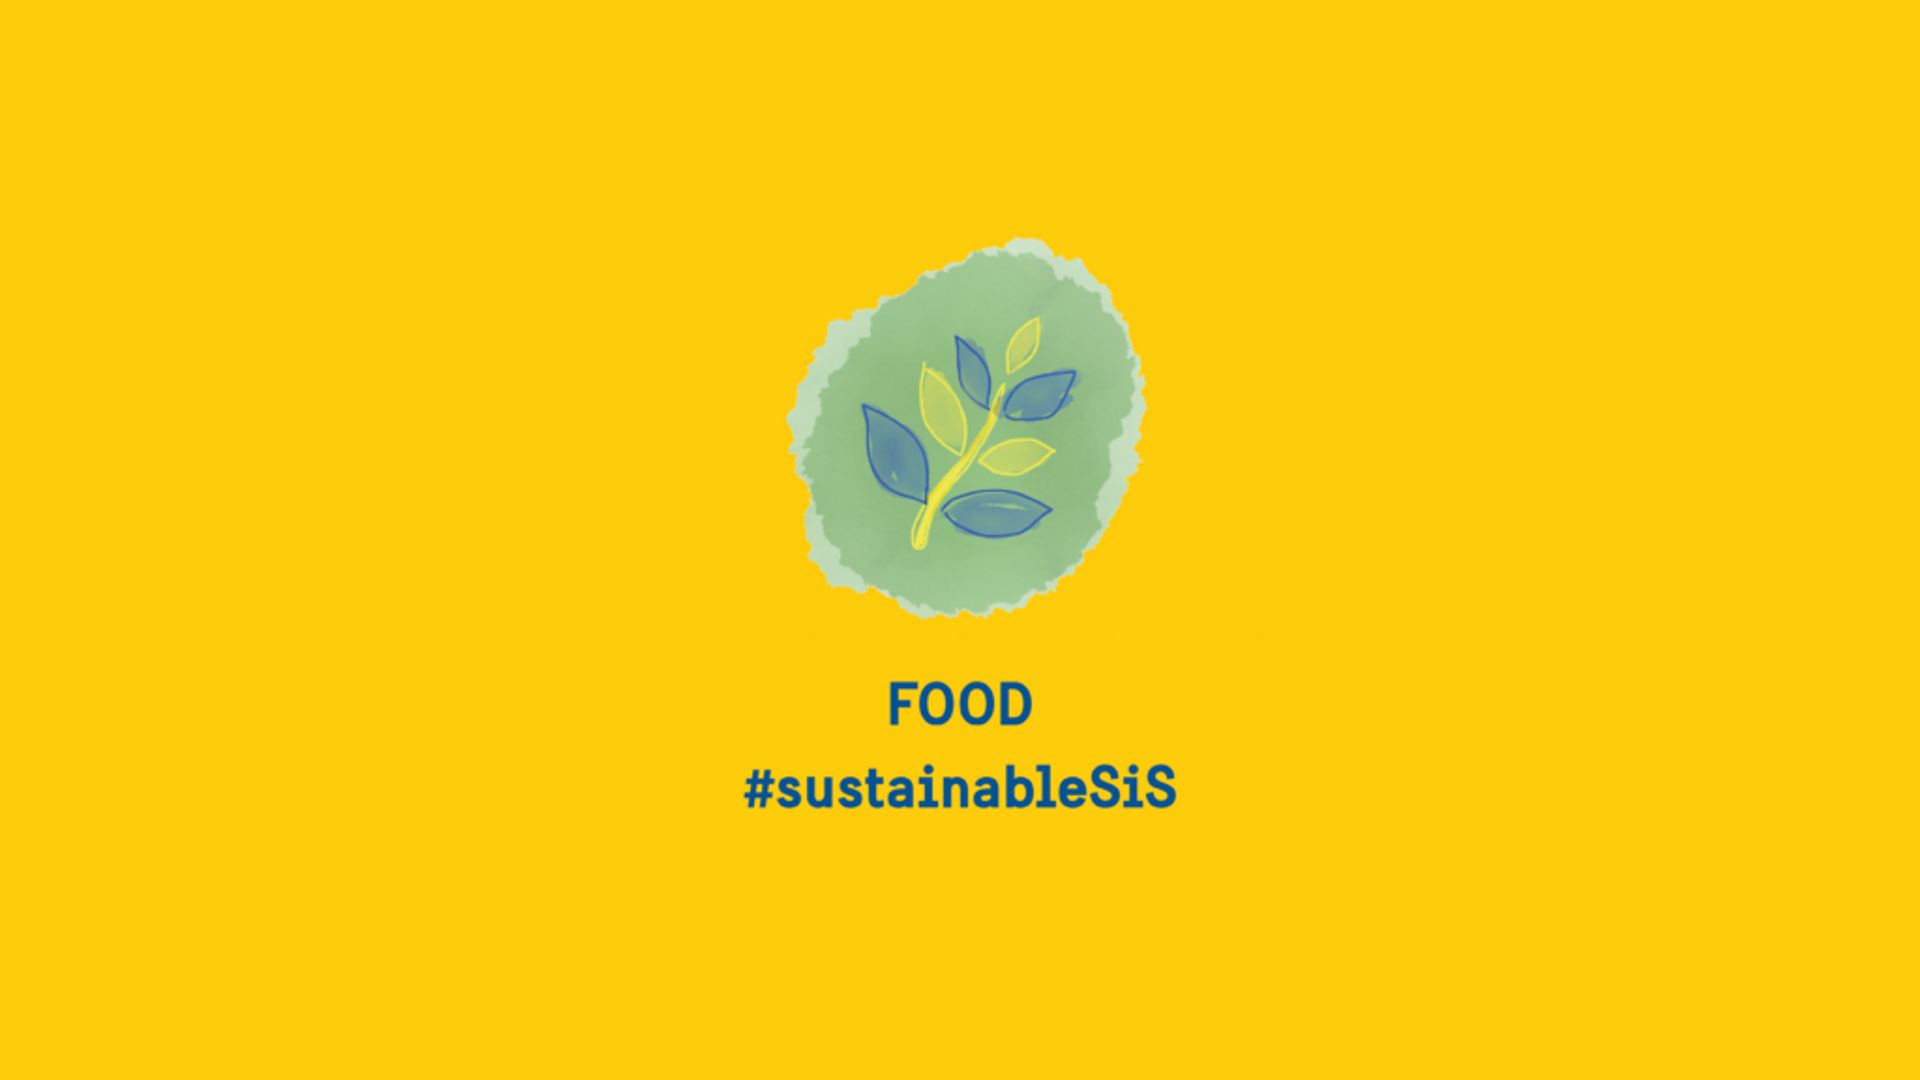 A flower in blue and yellow with the a text saying "food" together with a hashtag saying sustainableSiS. The background is all yellow.